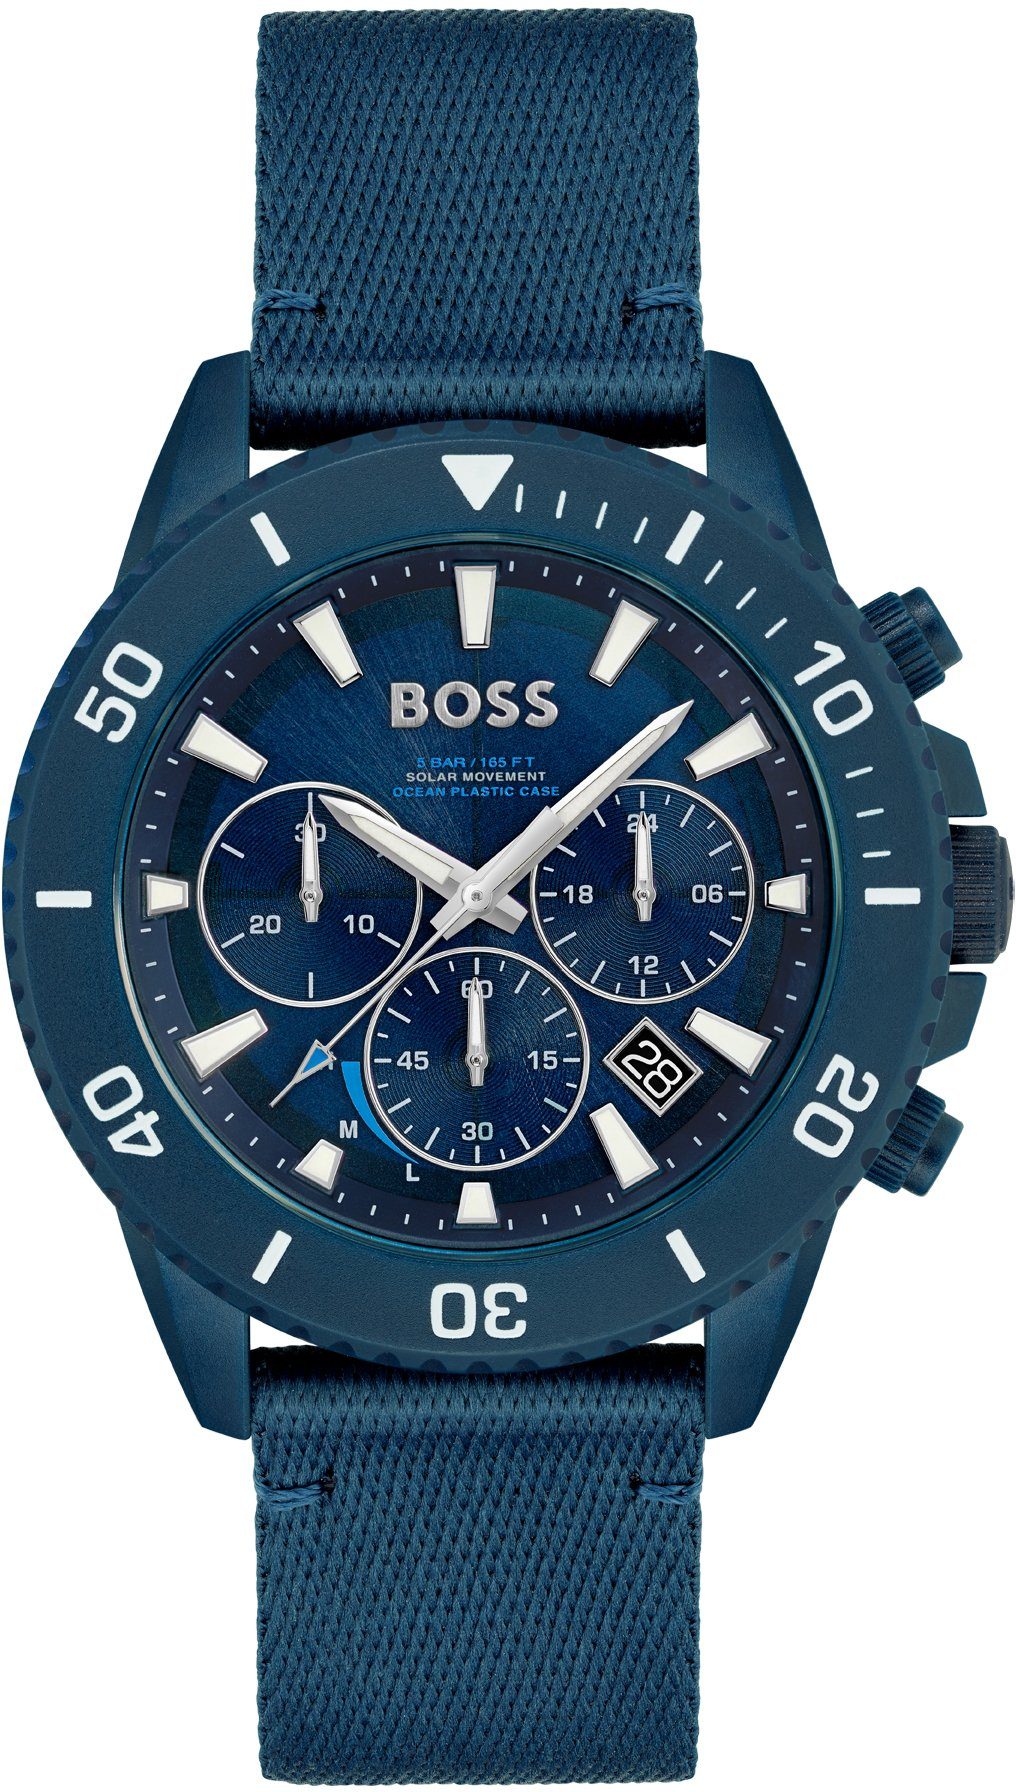 BOSS Chronograph Admiral Sustainable 1513919 #tide